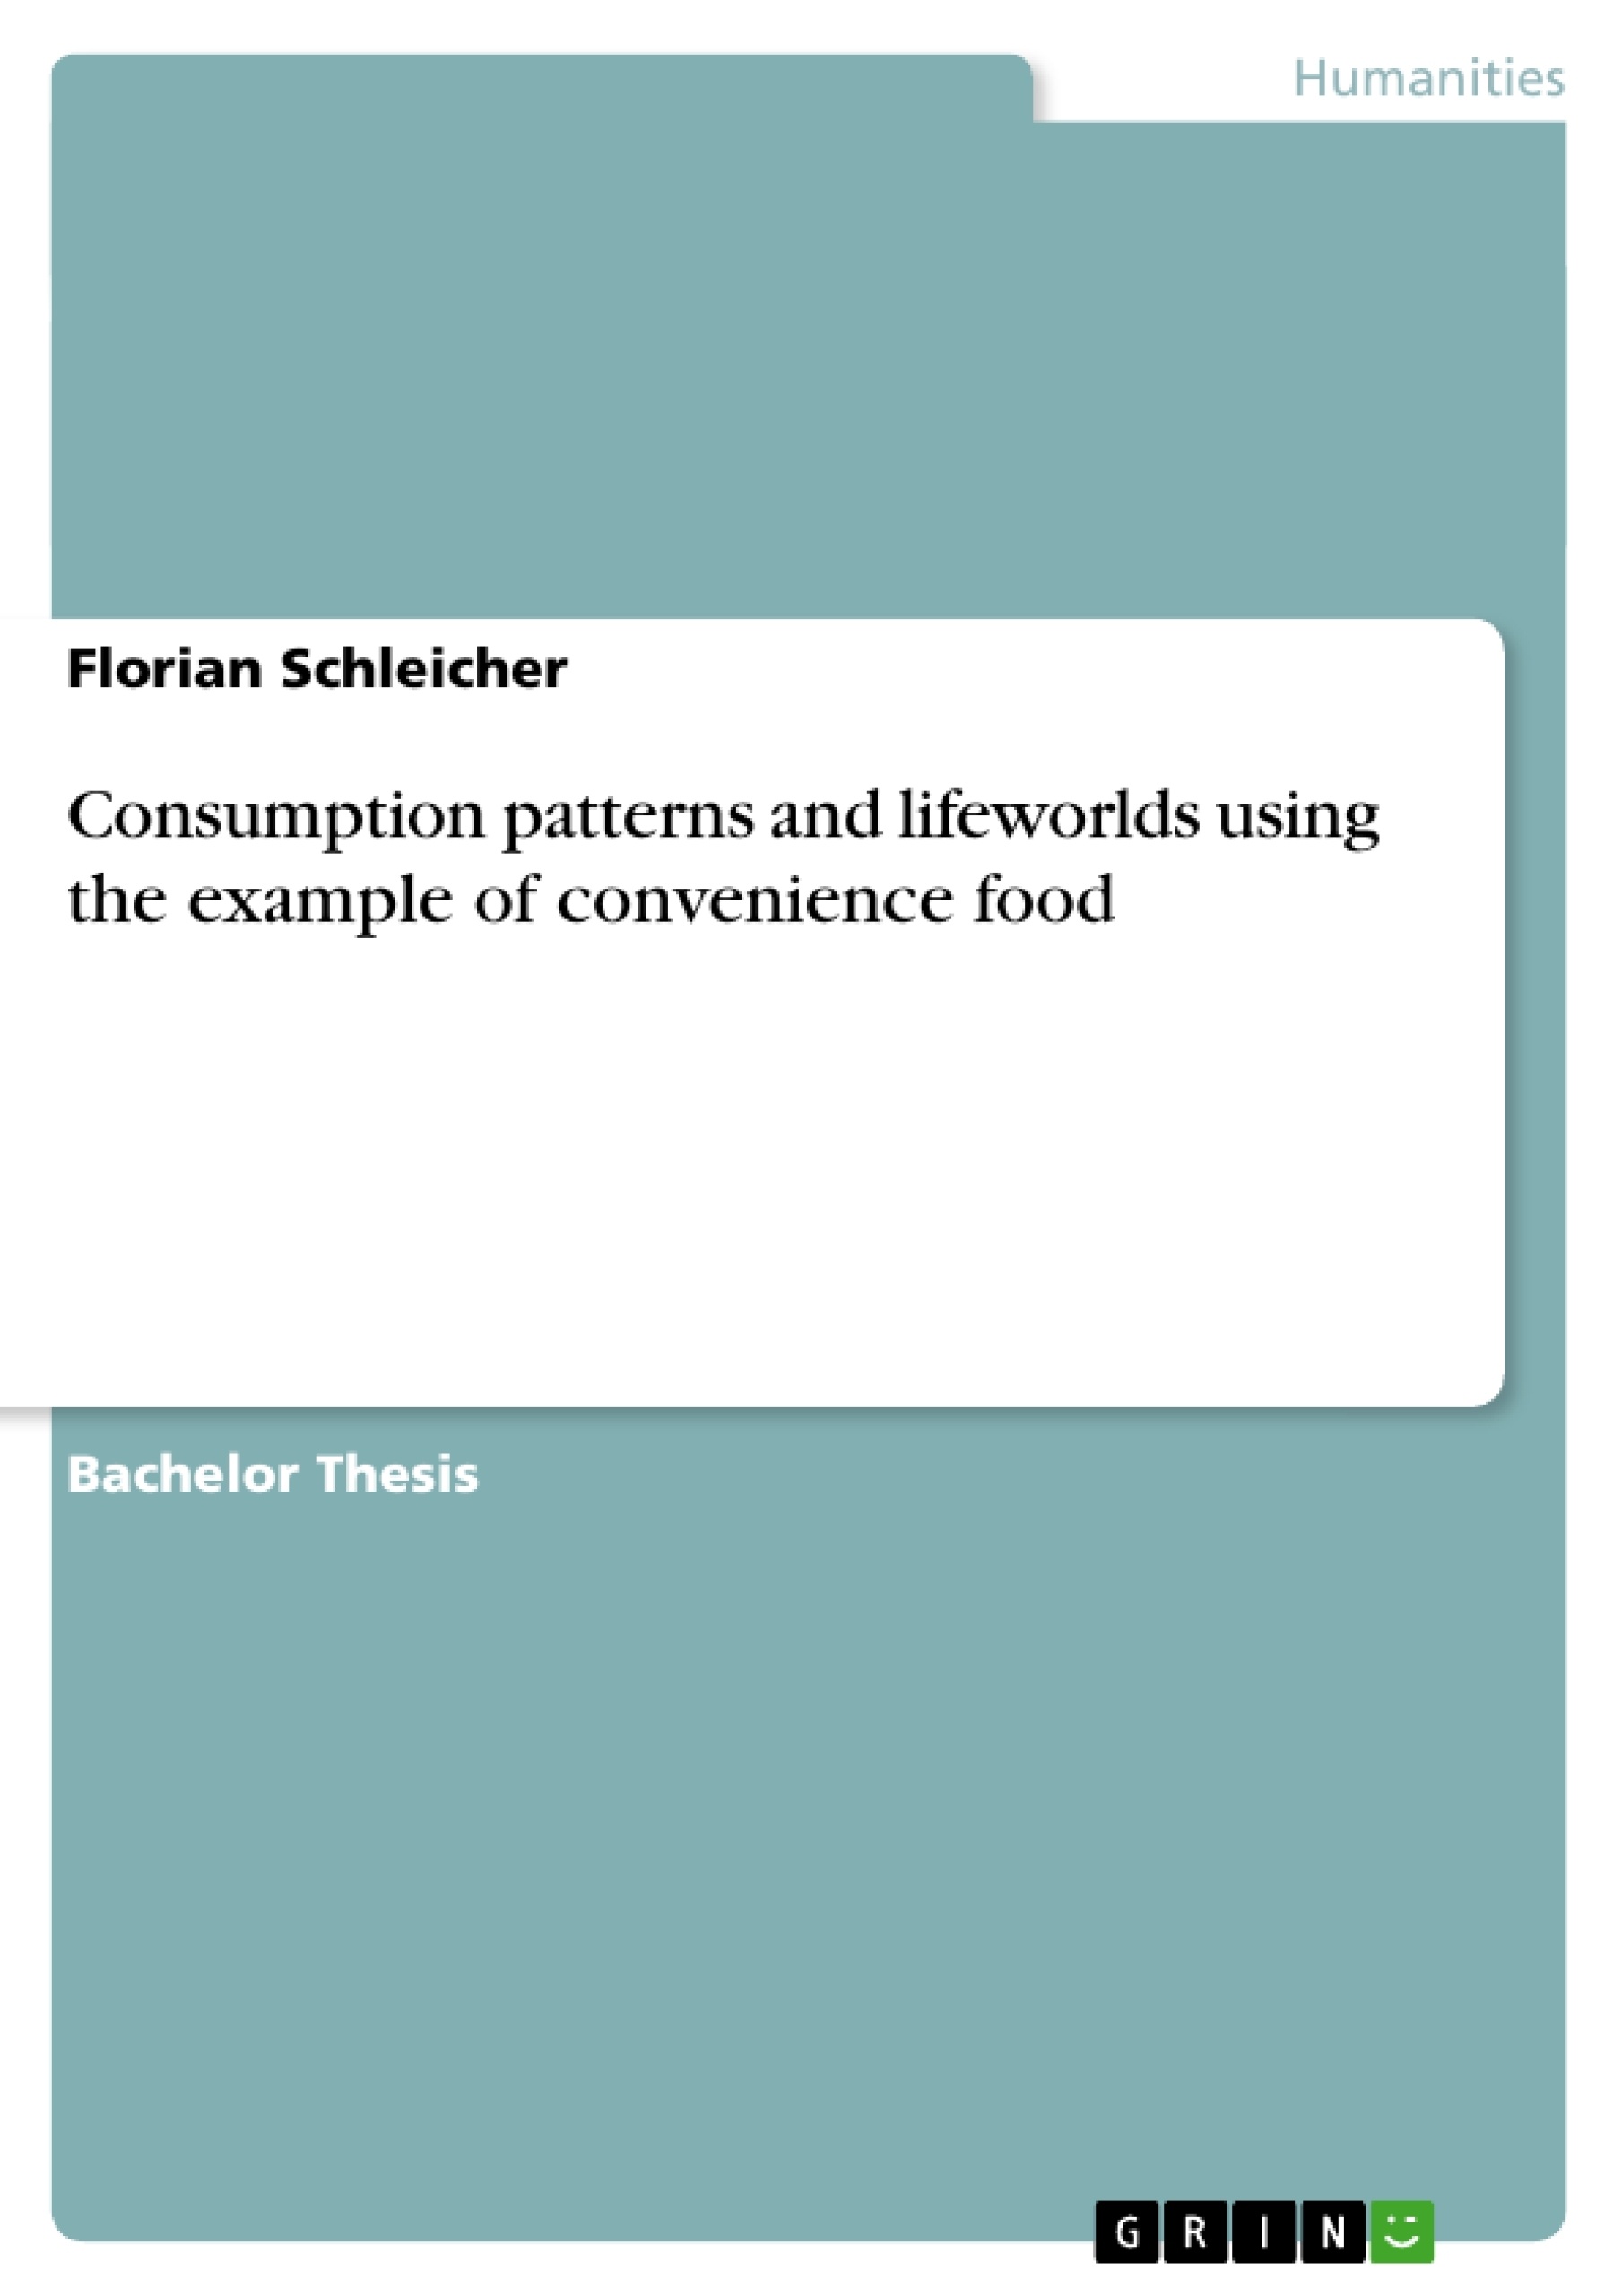 Título: Consumption patterns and lifeworlds using the example of convenience food